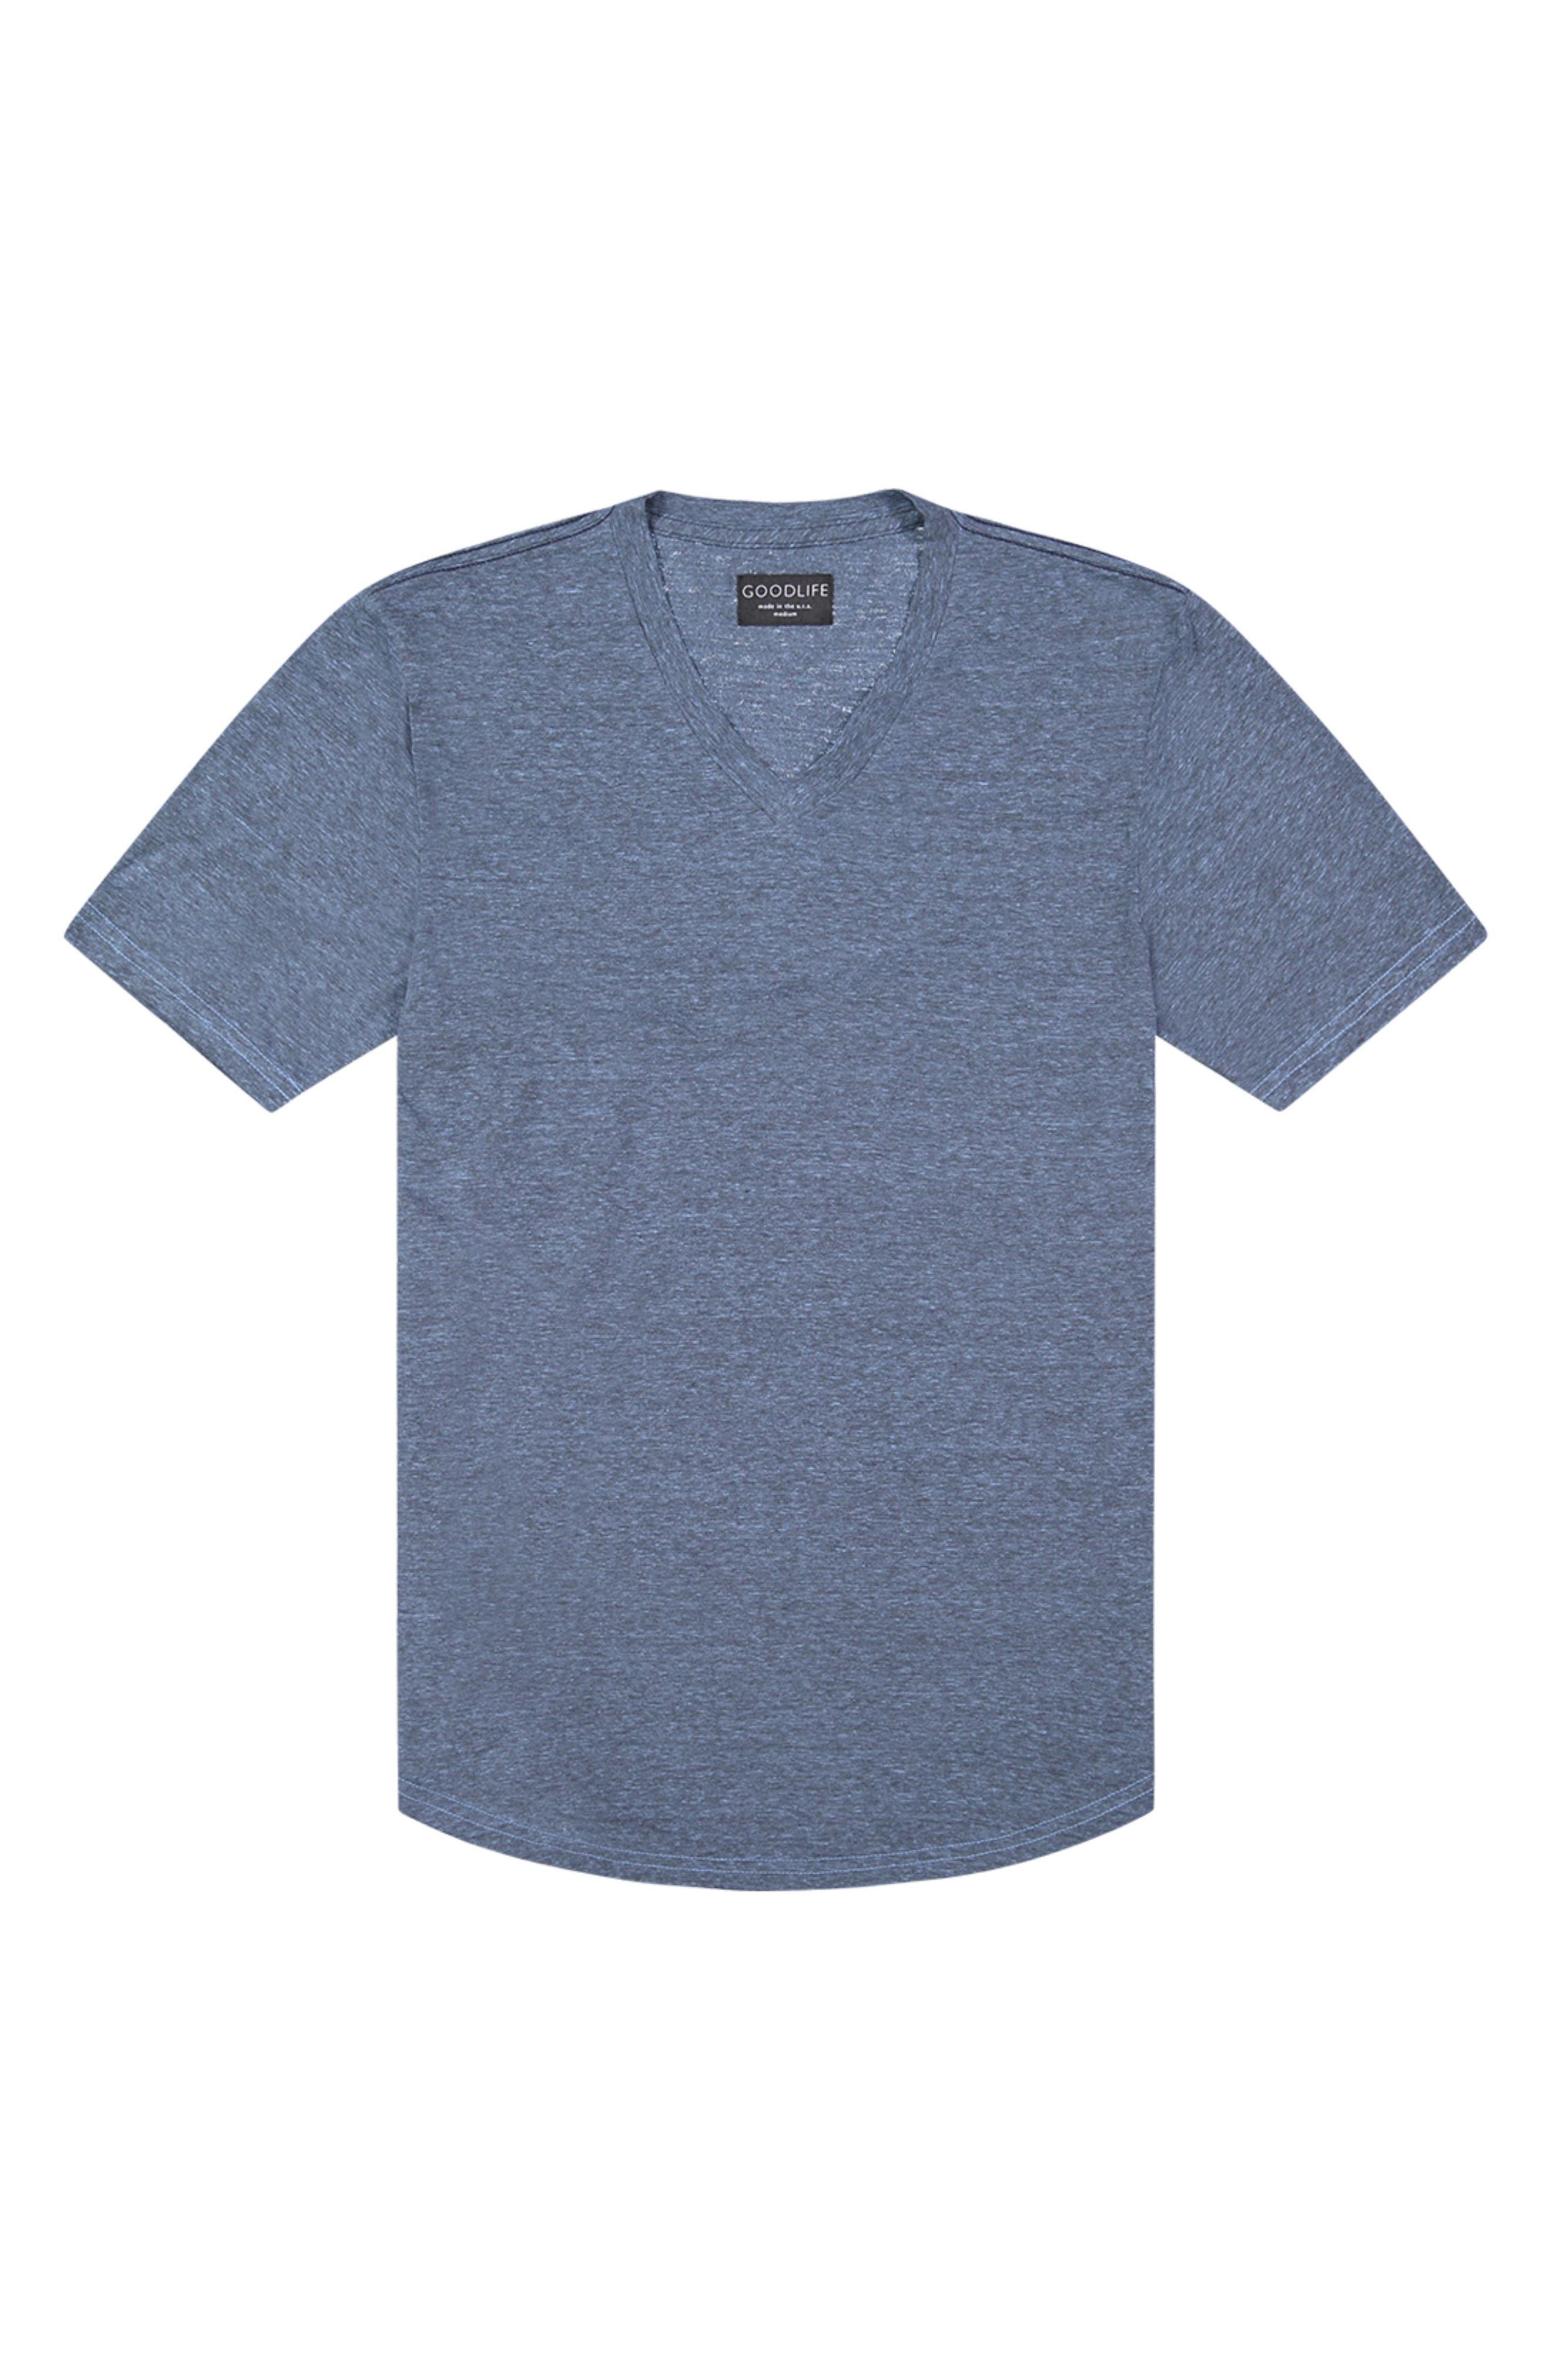 Goodlife Scallop T-shirt In Blue Bell